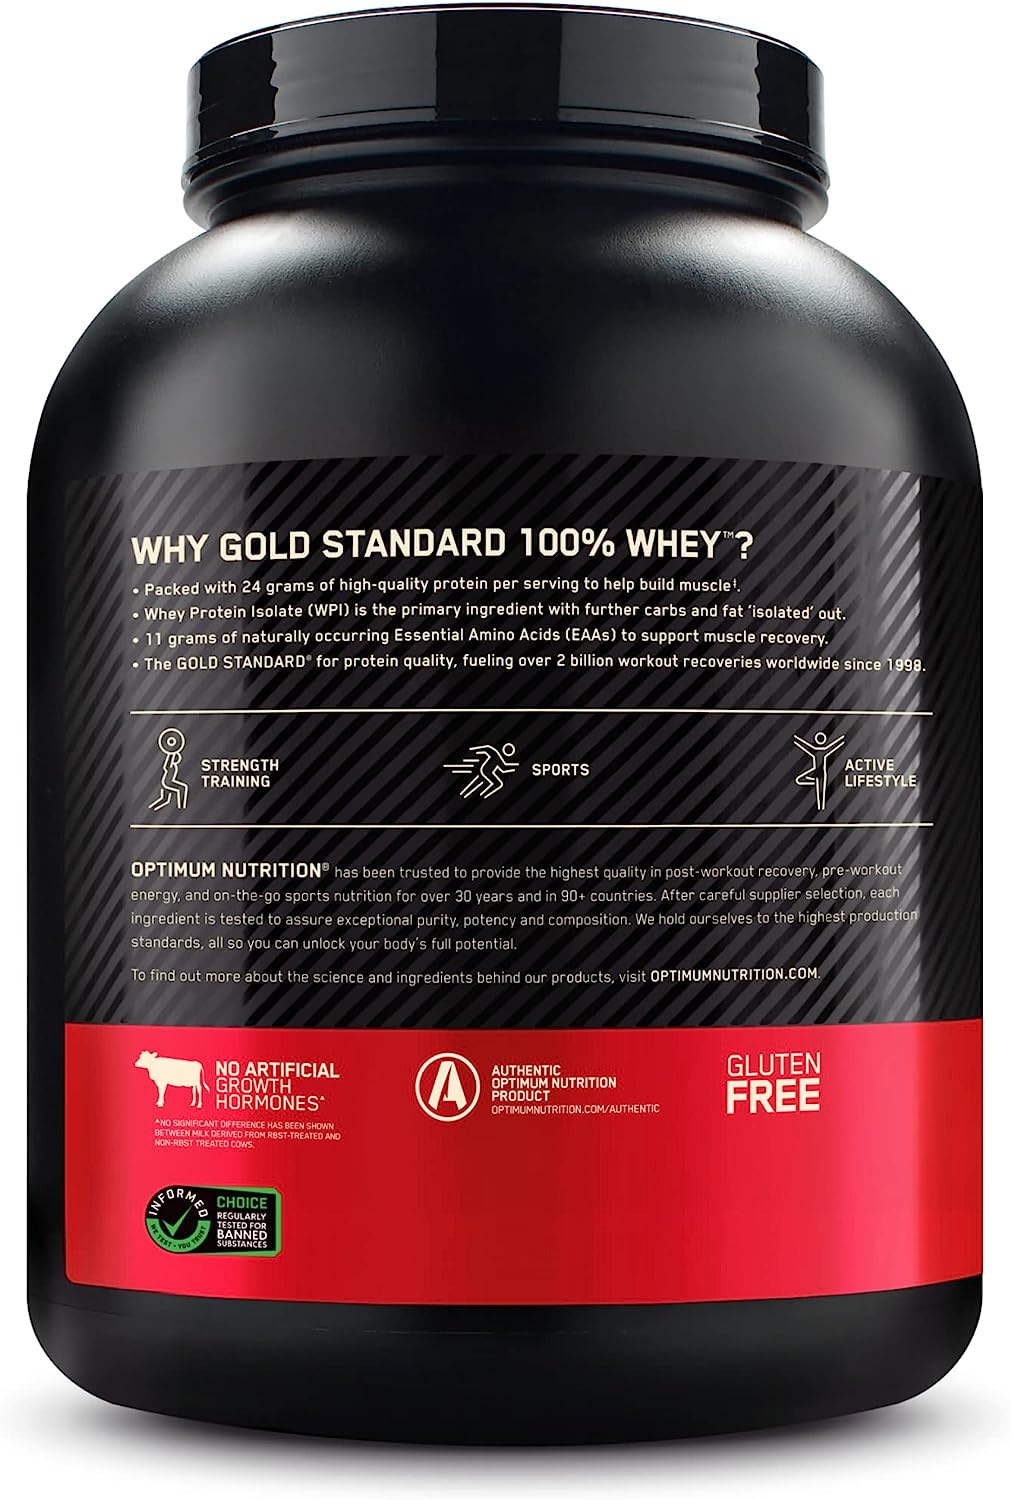 Optimum Nutrition Gold Standard 100% Whey Protein Powder, Double Rich Chocolate, 5 Pound (Packaging May Vary)